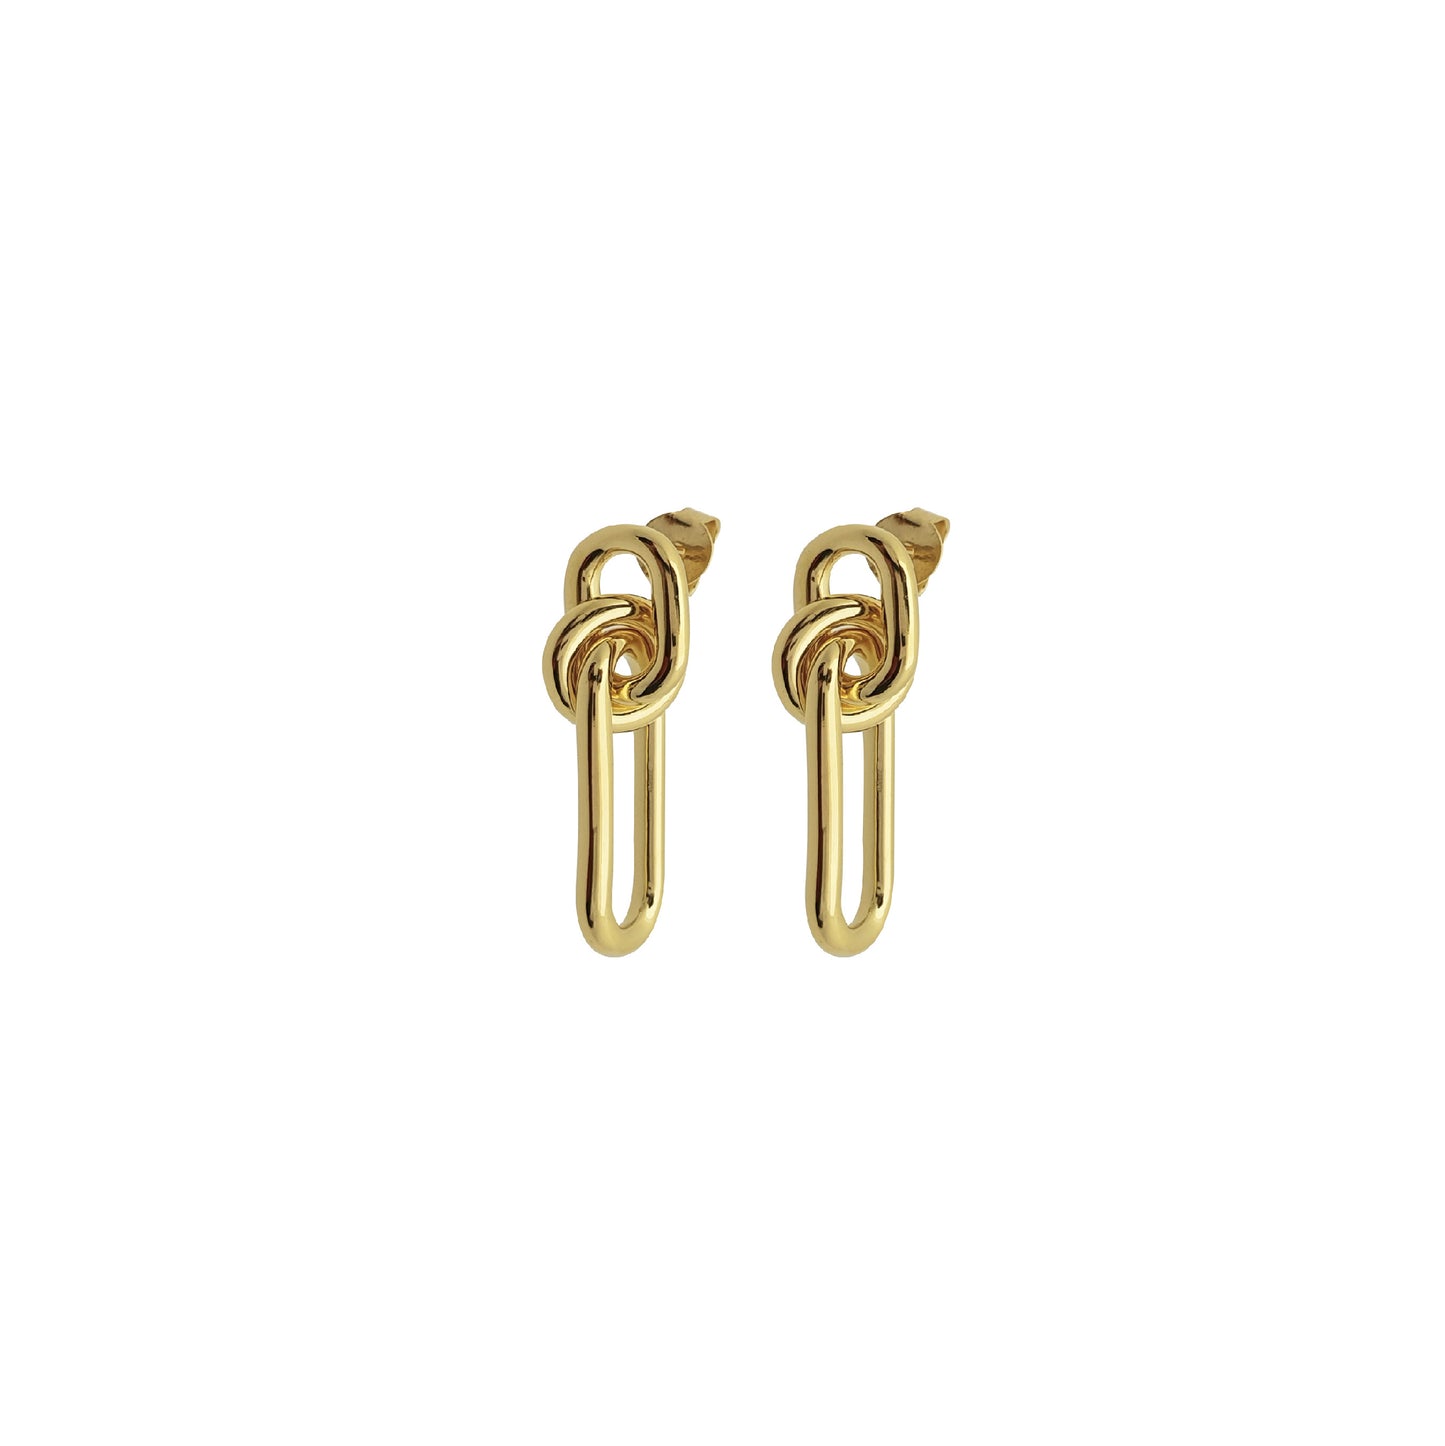 Earrings Intertwined Knot Wrap 18K Gold Plated Sterling Silver